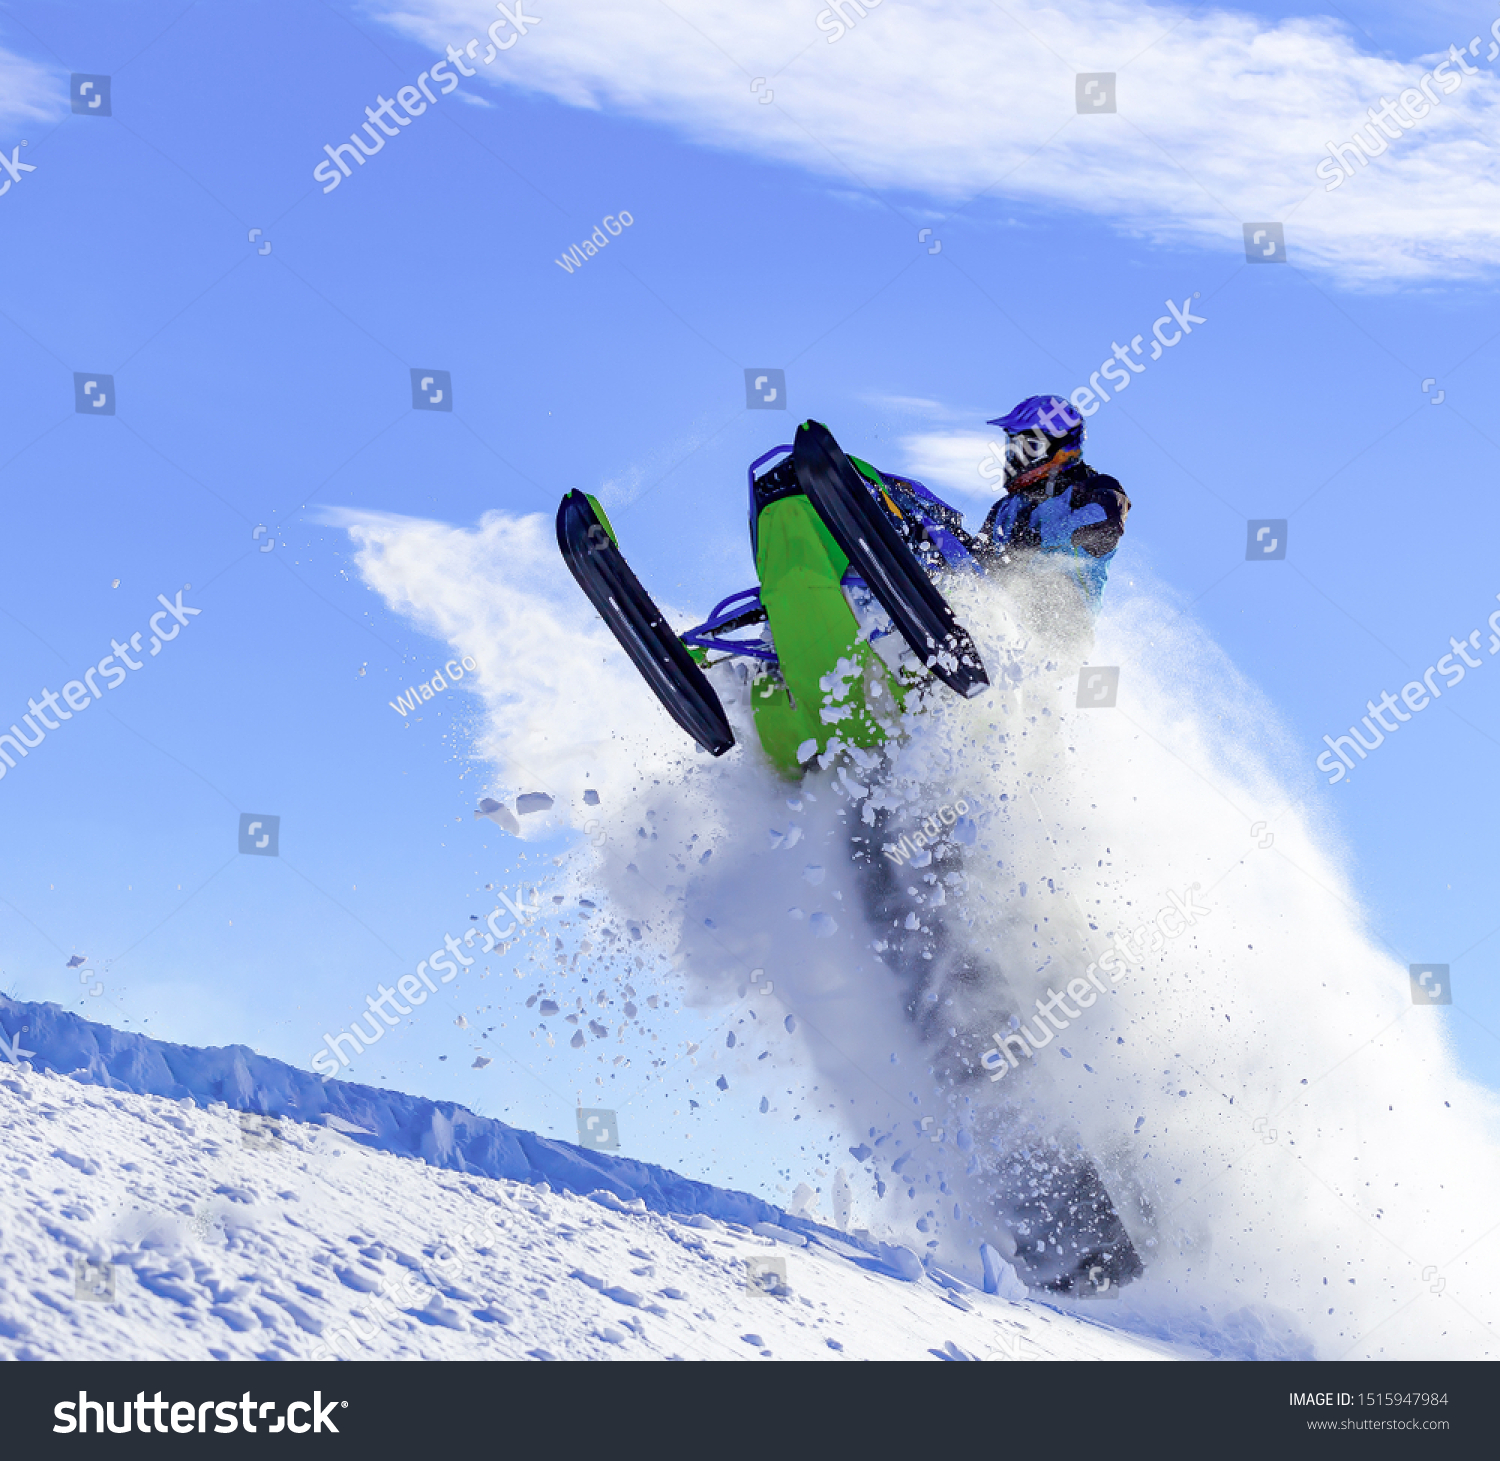 the guy is flying and jumping on a snowmobile on a background of blue sky leaving a trail of splashes of white snow. bright snowmobile and suit without brands. extra high quality #1515947984